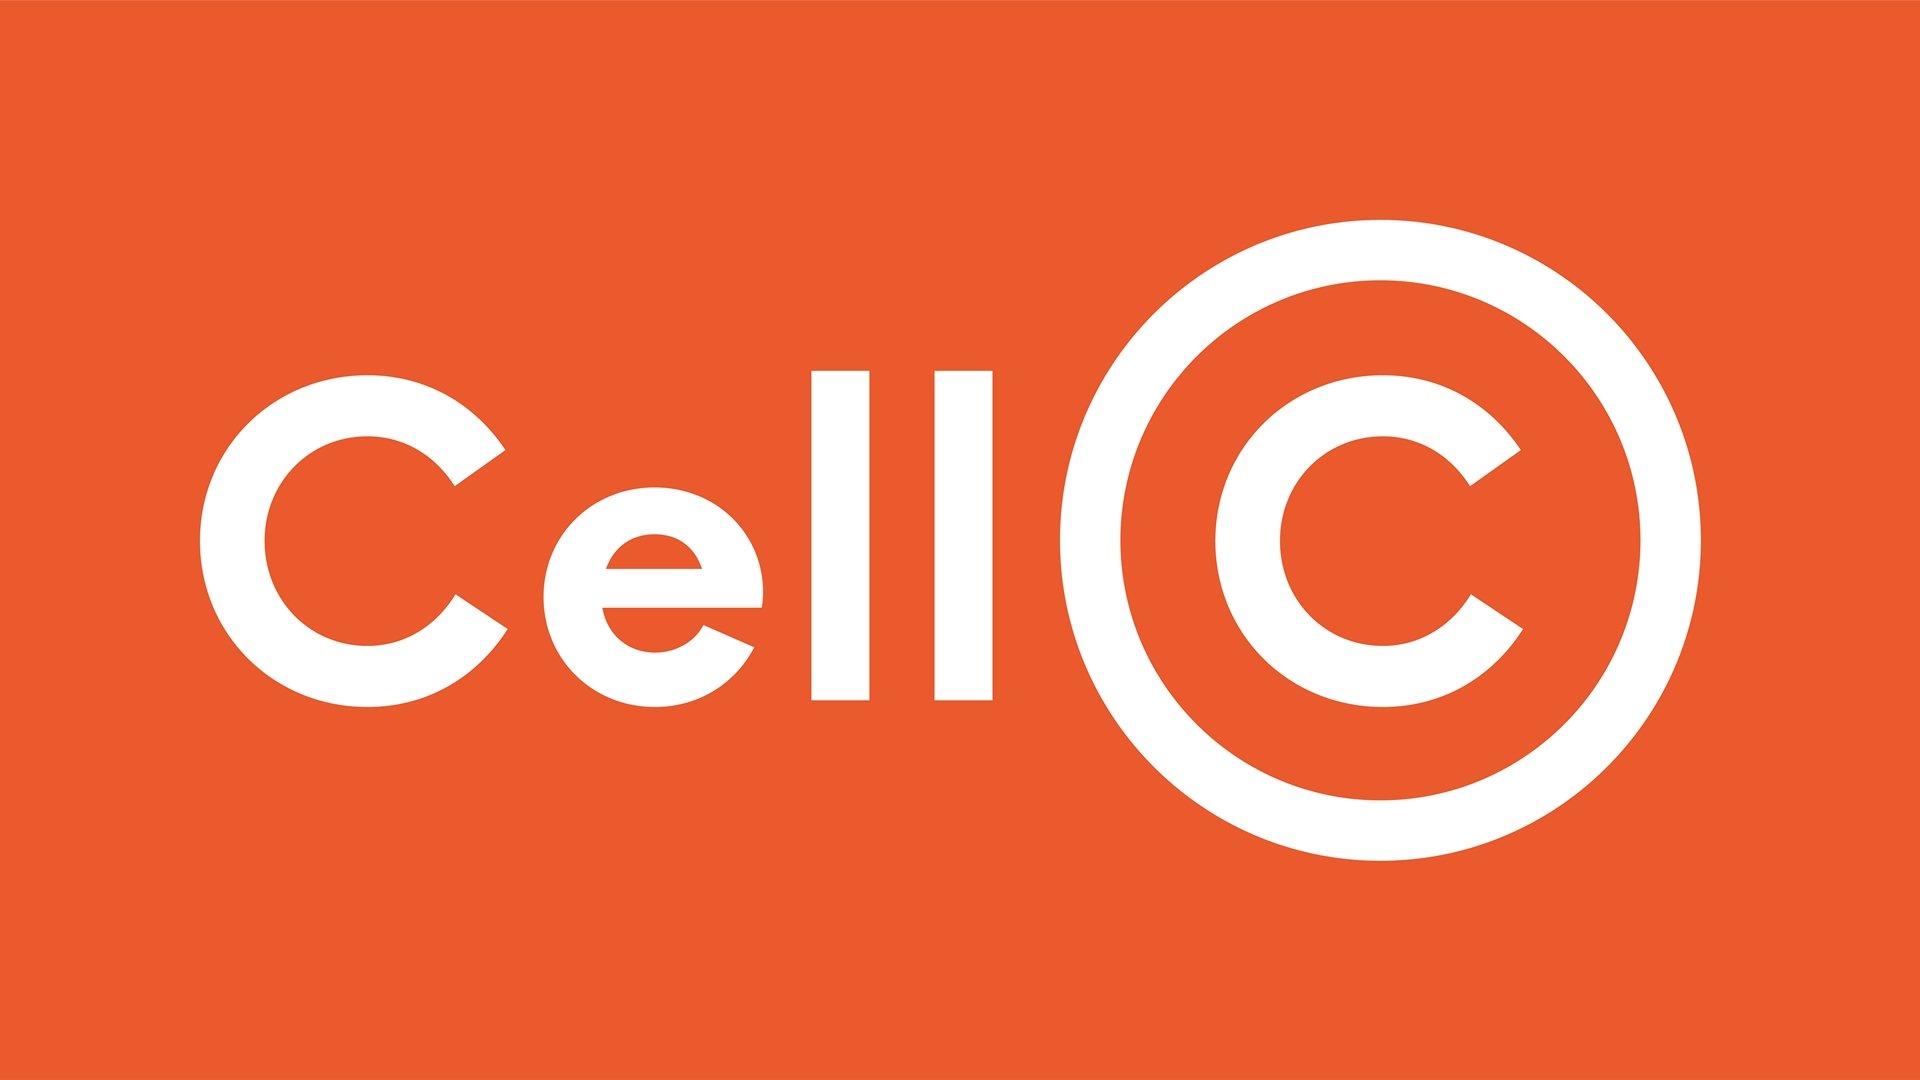 cell-c-south-africa